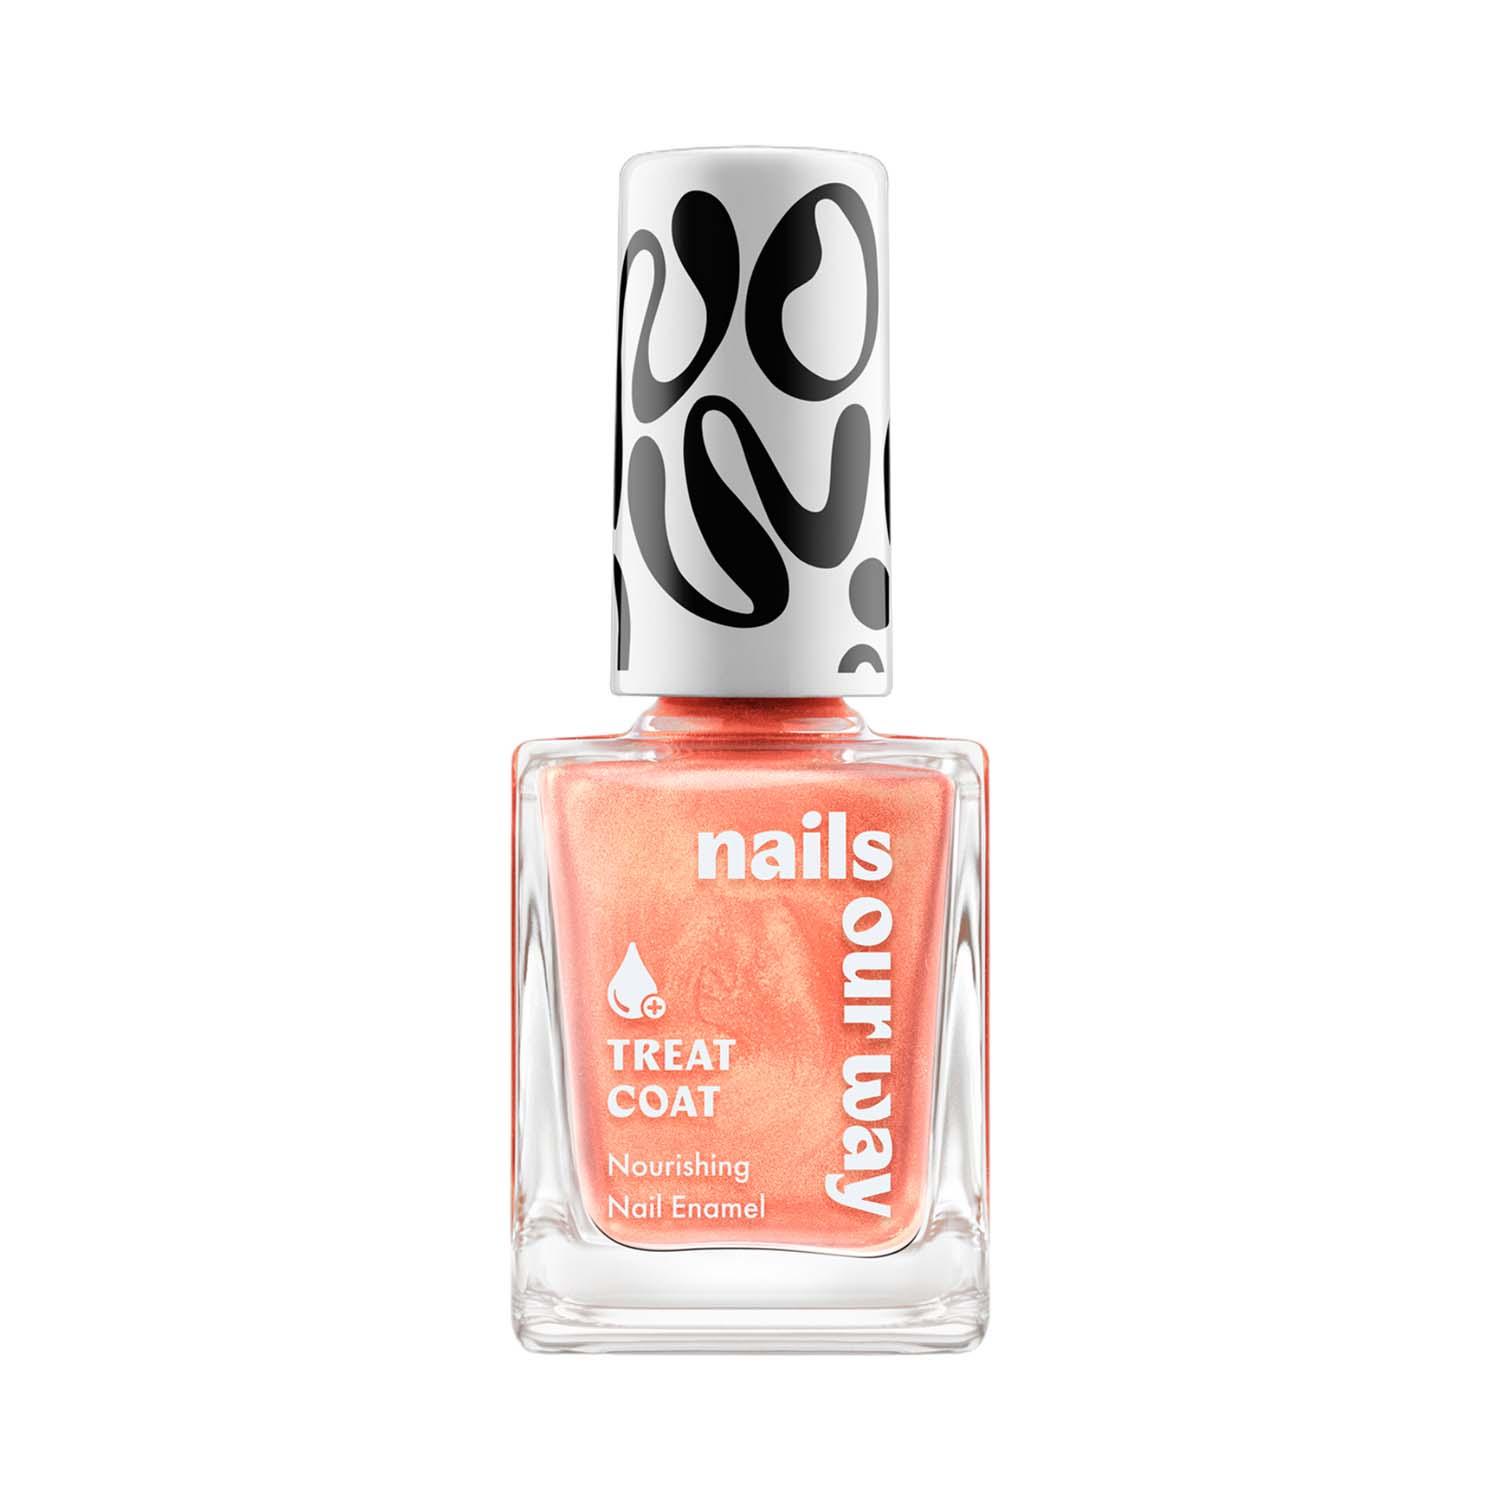 Nails Our Way | Nails Our Way Treat Coat Nail Enamel - Mystical Mastermind (10 ml)